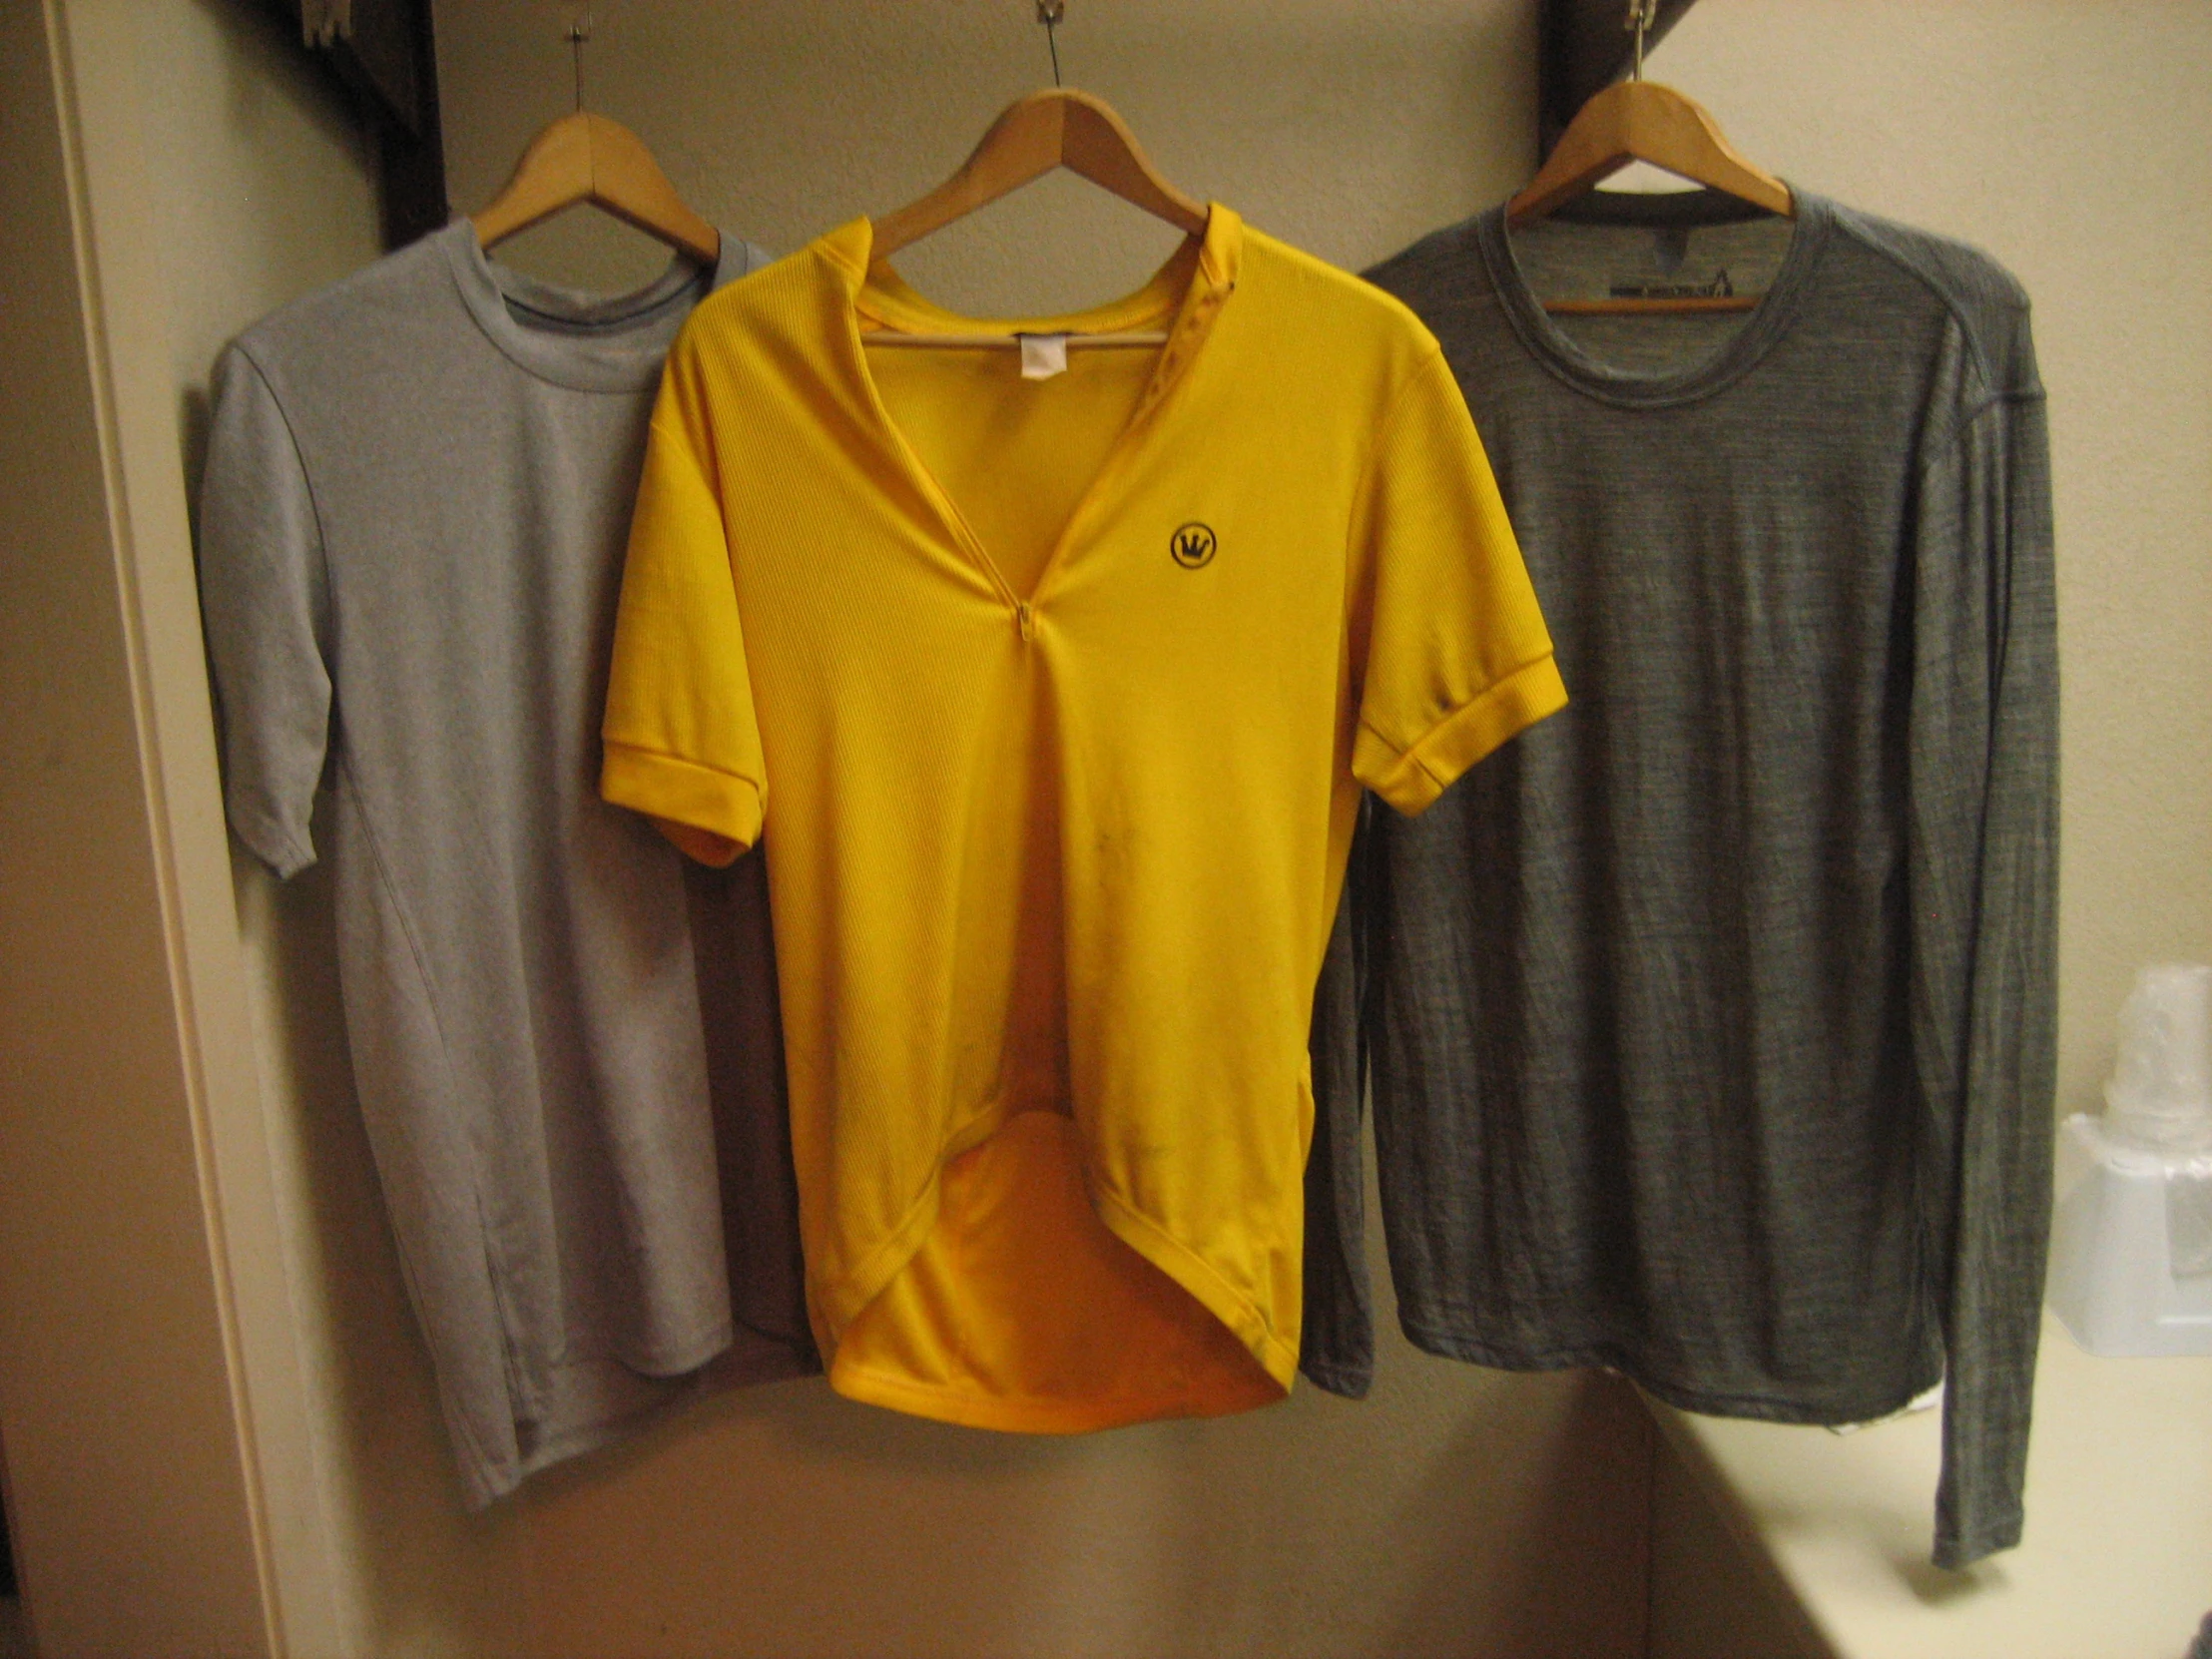 three t shirts hang on a clothes line in a closet